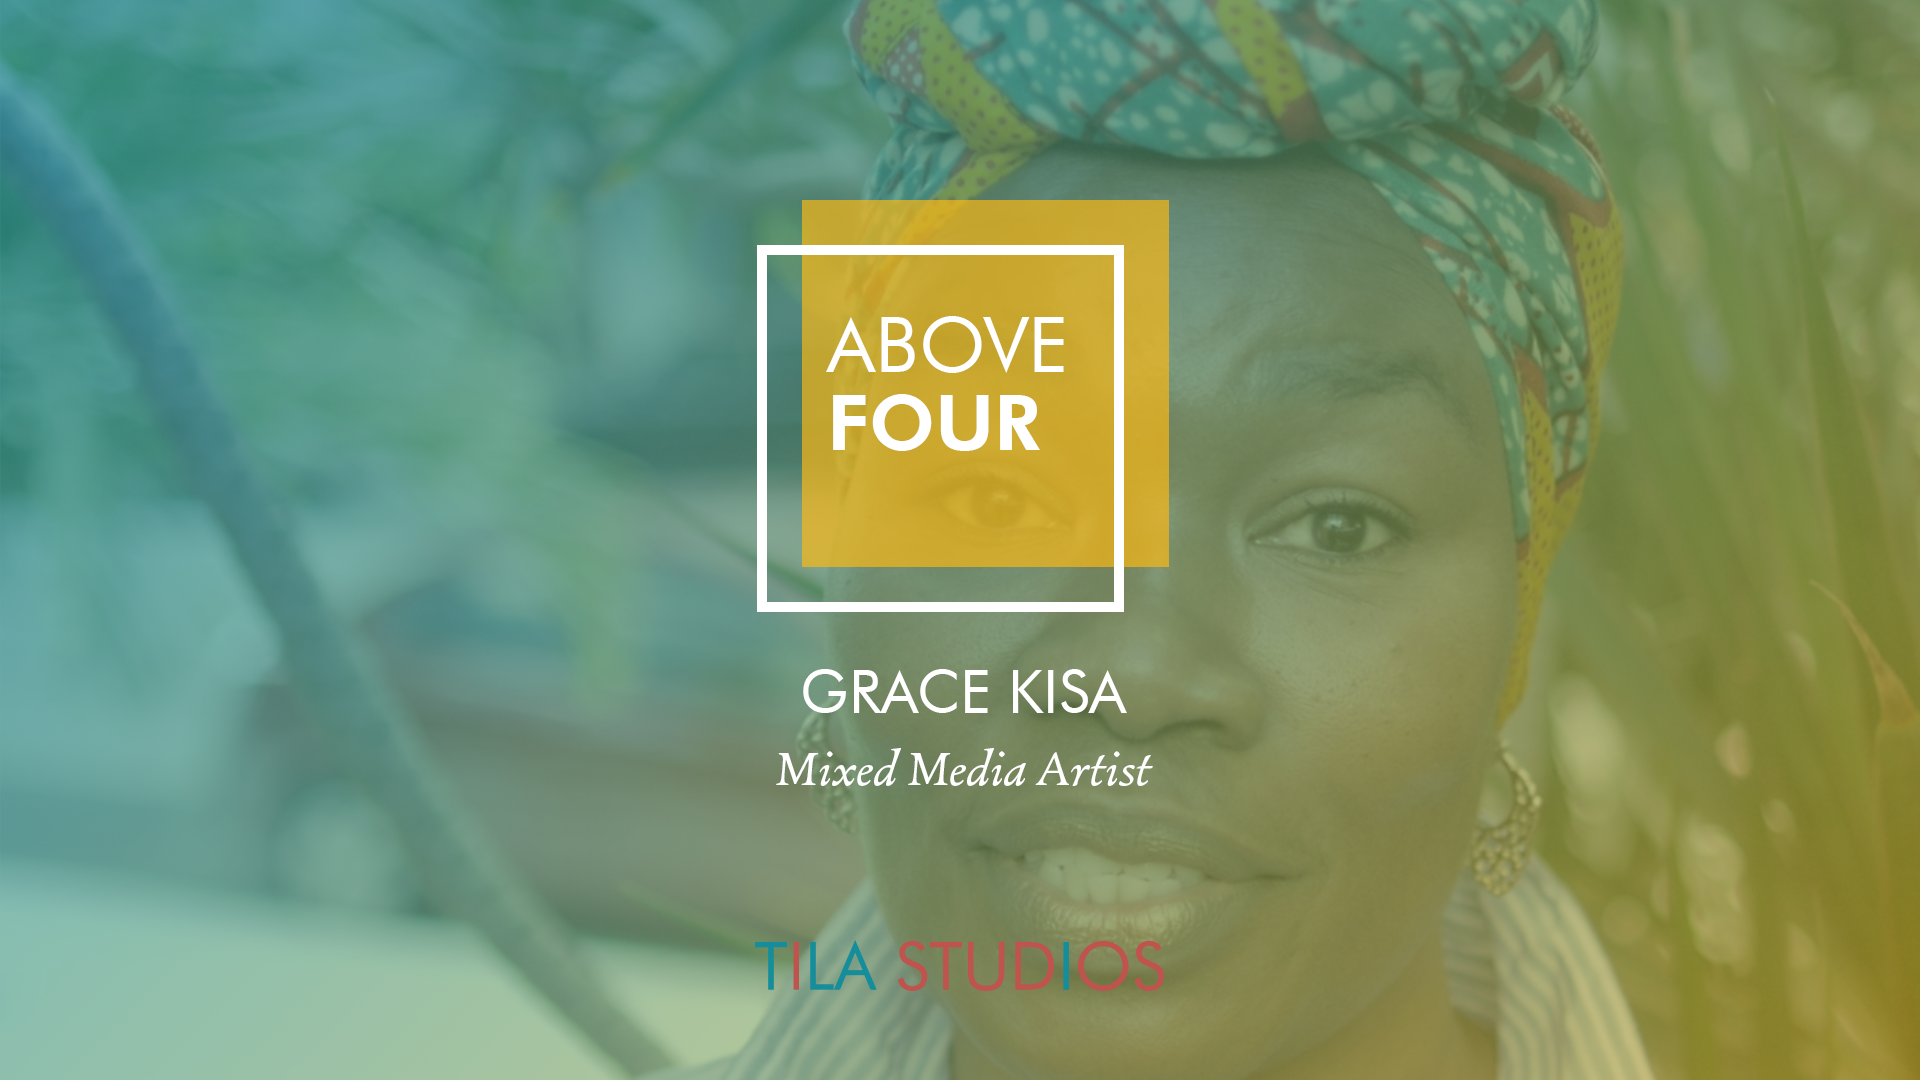 Above Four: Grace Kisa on Evolving and Building an International Network